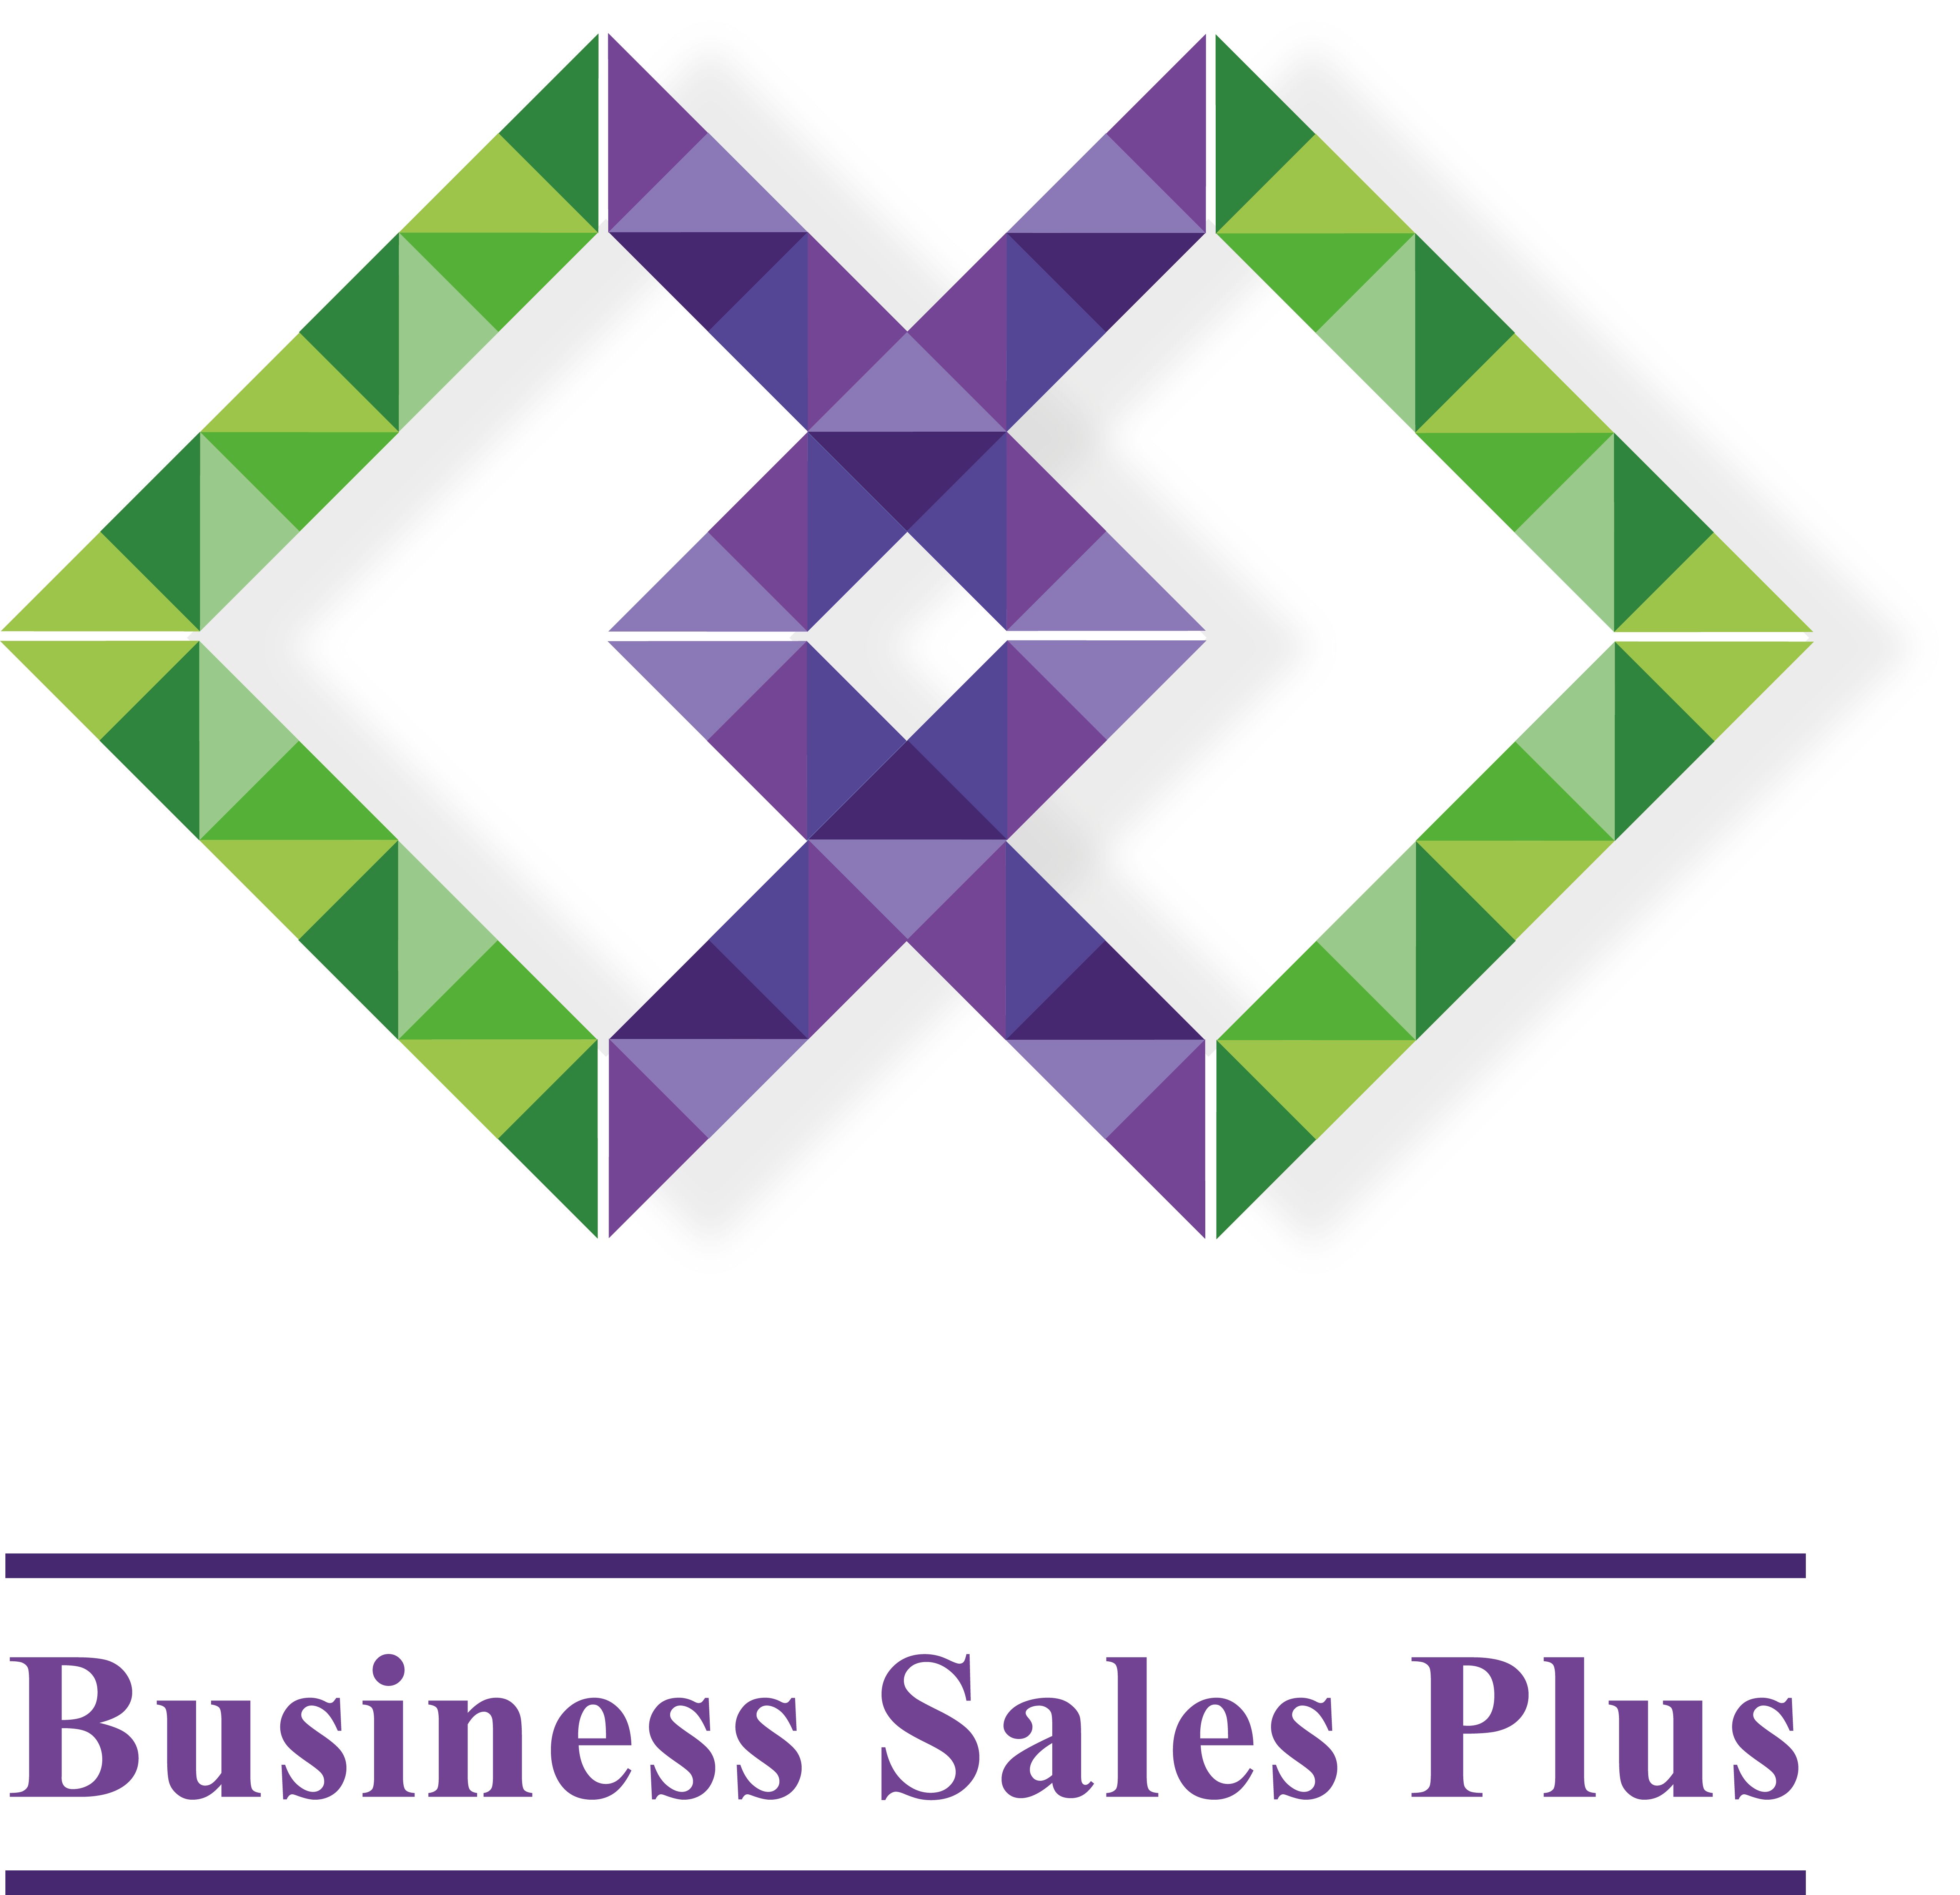 Business Sales Plus appoint five new franchisees in four weeks!